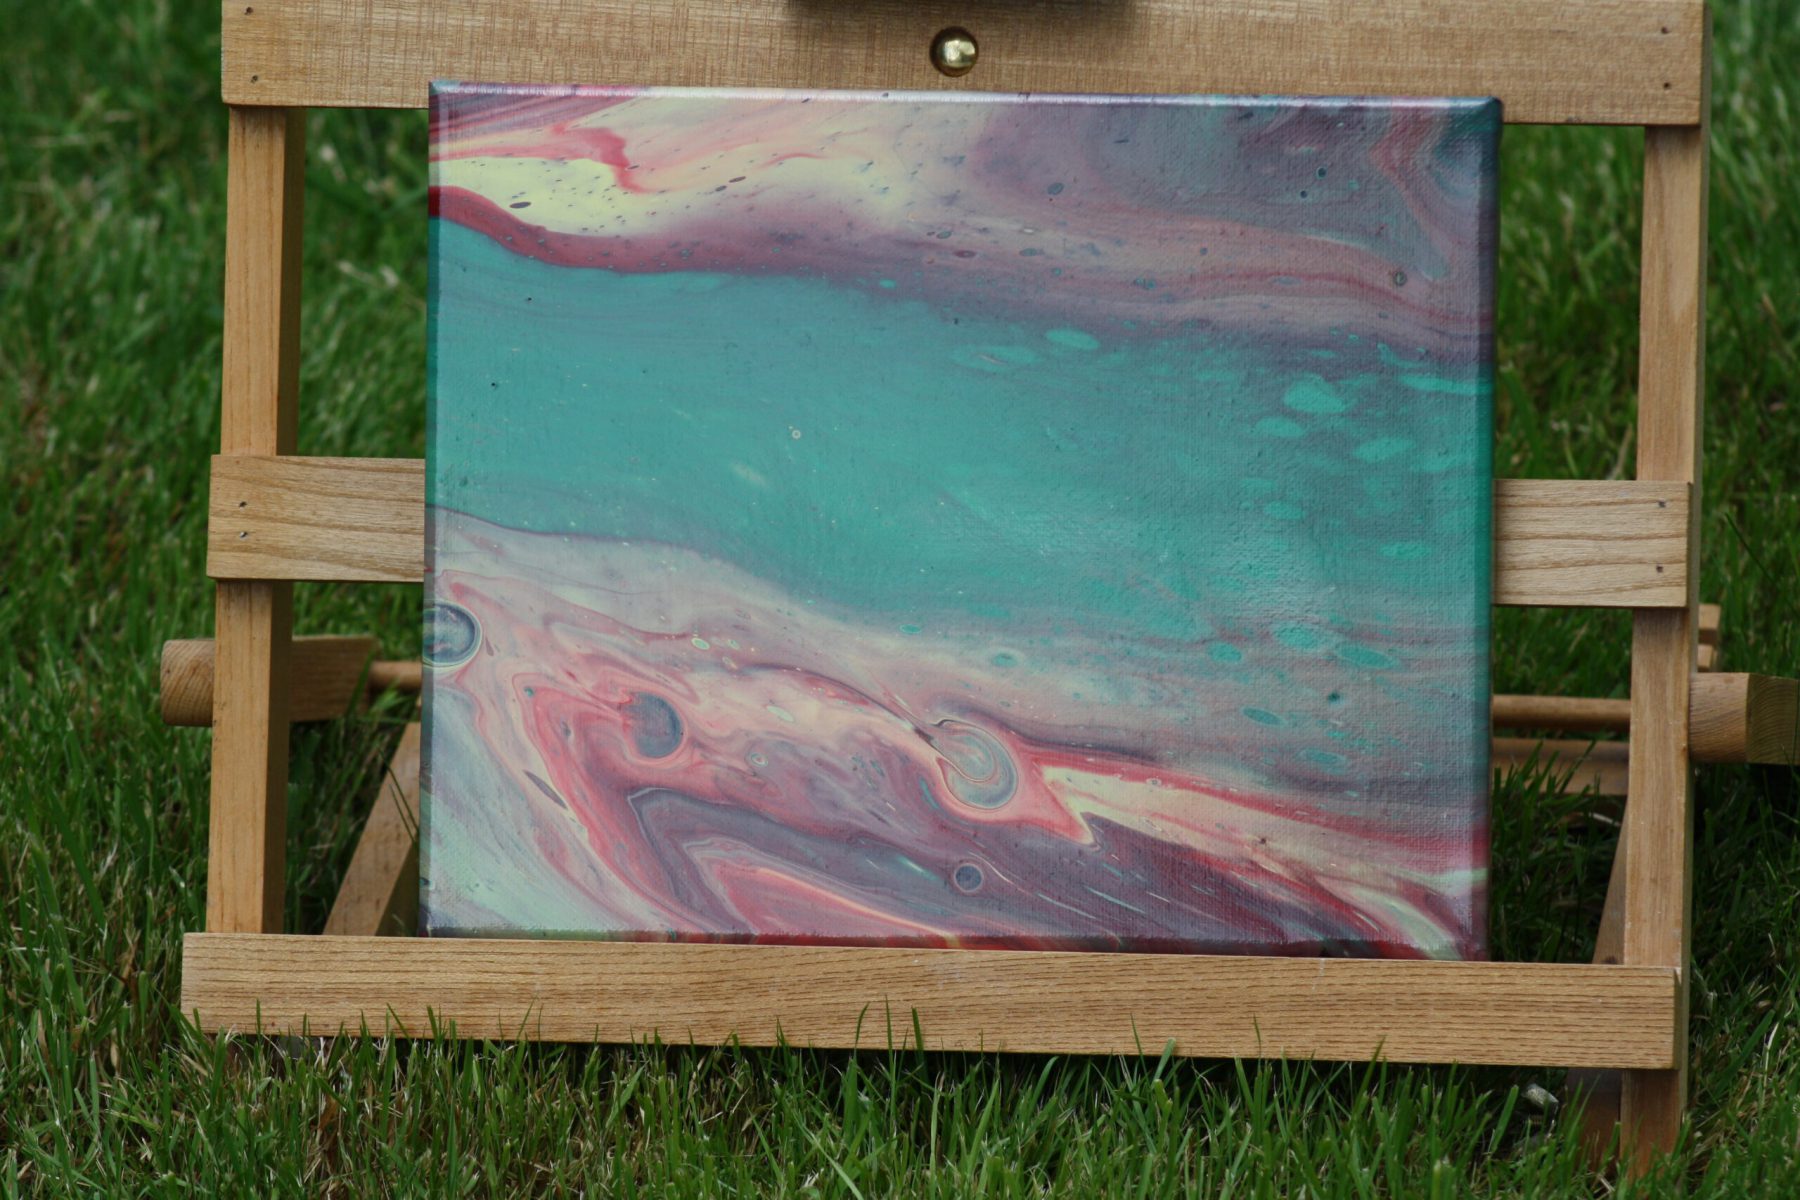 acrylic pouring